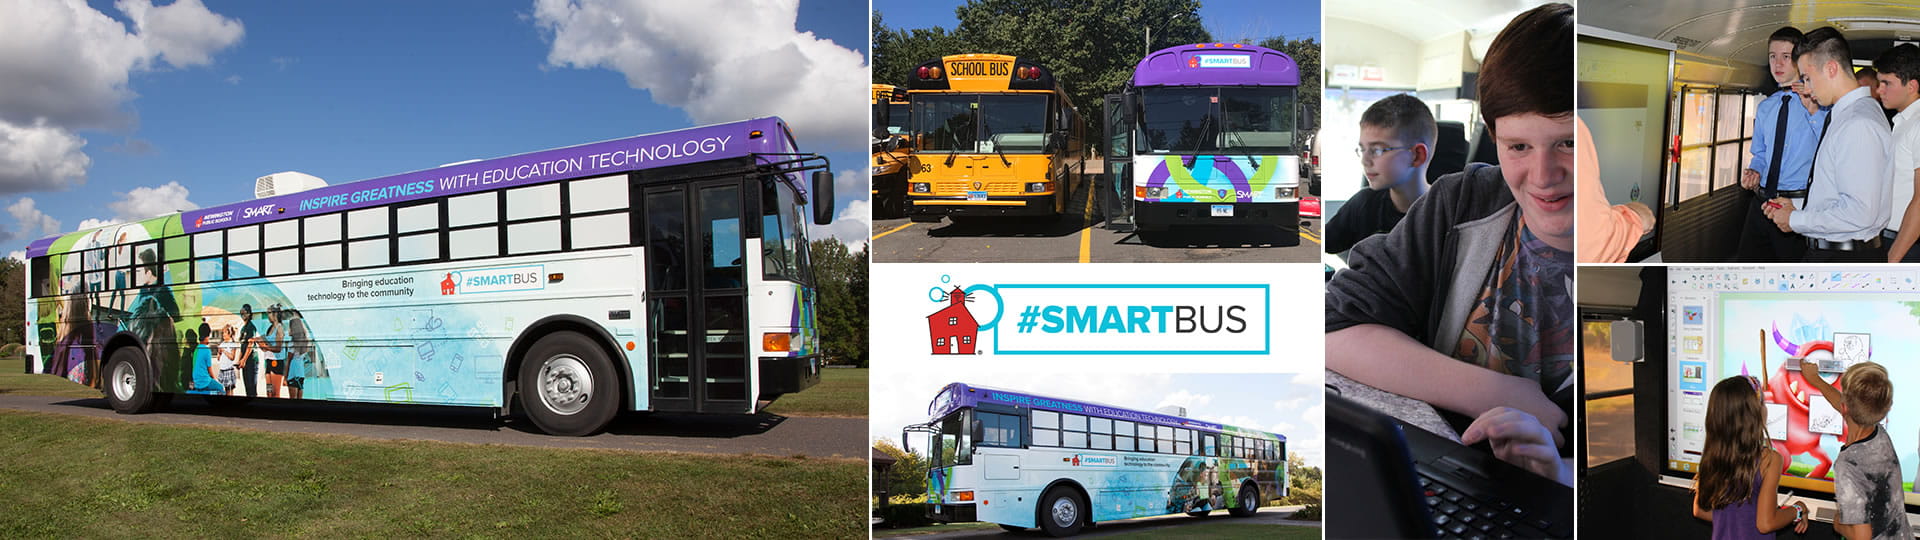 Image of the SMART Bus, a mobile technology lab outfitted with state-of-the-art displays, software and equipment from SMART Technologies.